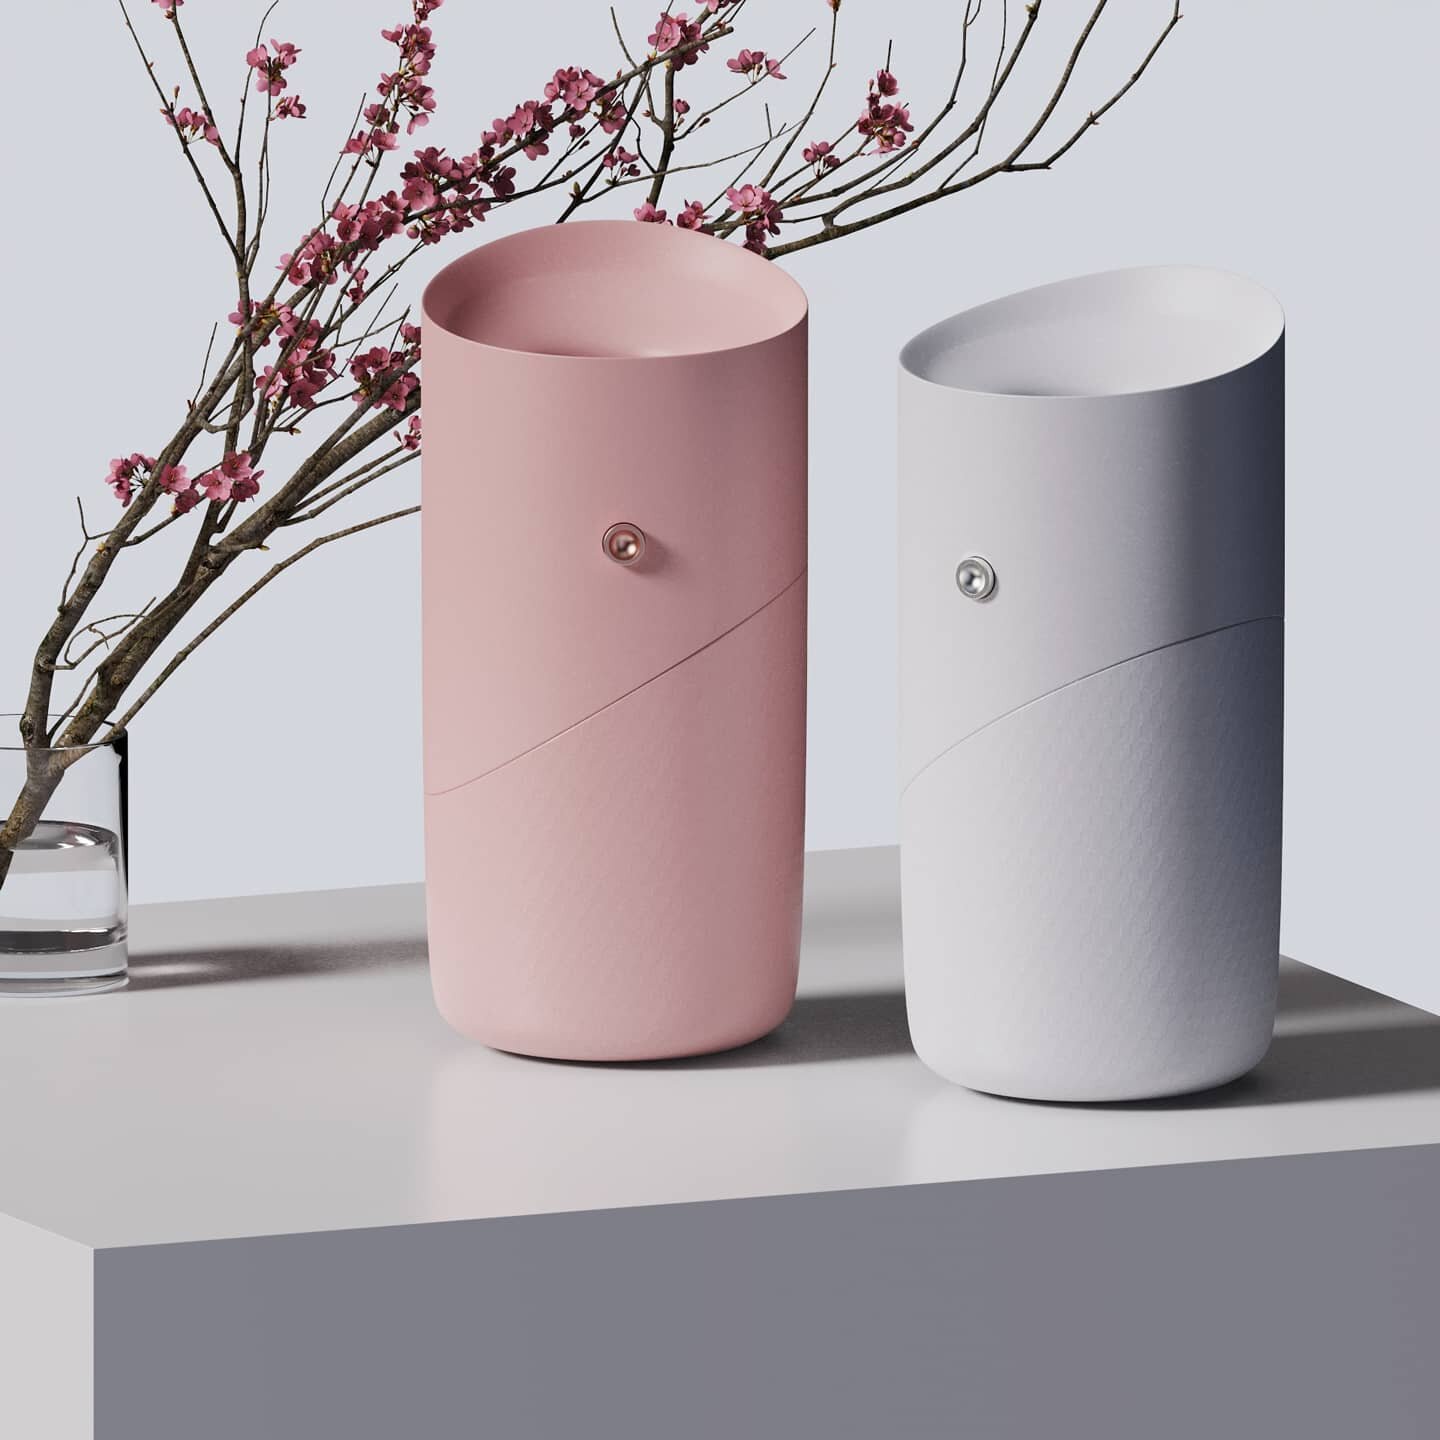 The Ease humidifier. It was done for a short project for a class. Here's it's featured in two colorways, Sakura and Snow. 🌺❄️
.
.
.
.
.
#productdesign #product #industrialdesign #womenindesign #design #designloaded #keyshotrender #keyshot #womeninin